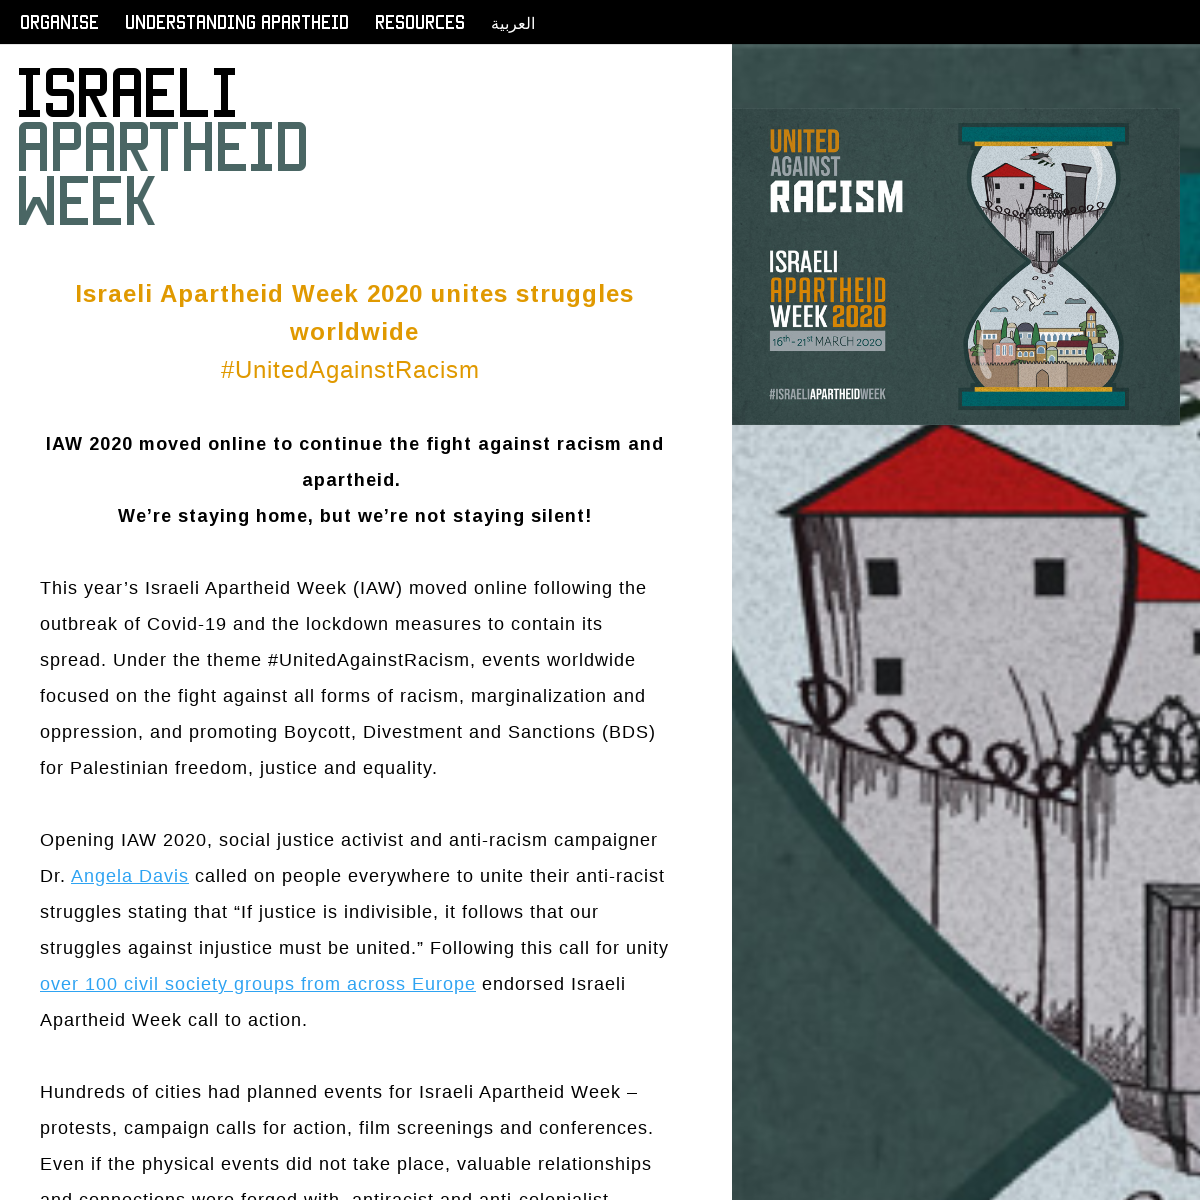 A complete backup of apartheidweek.org